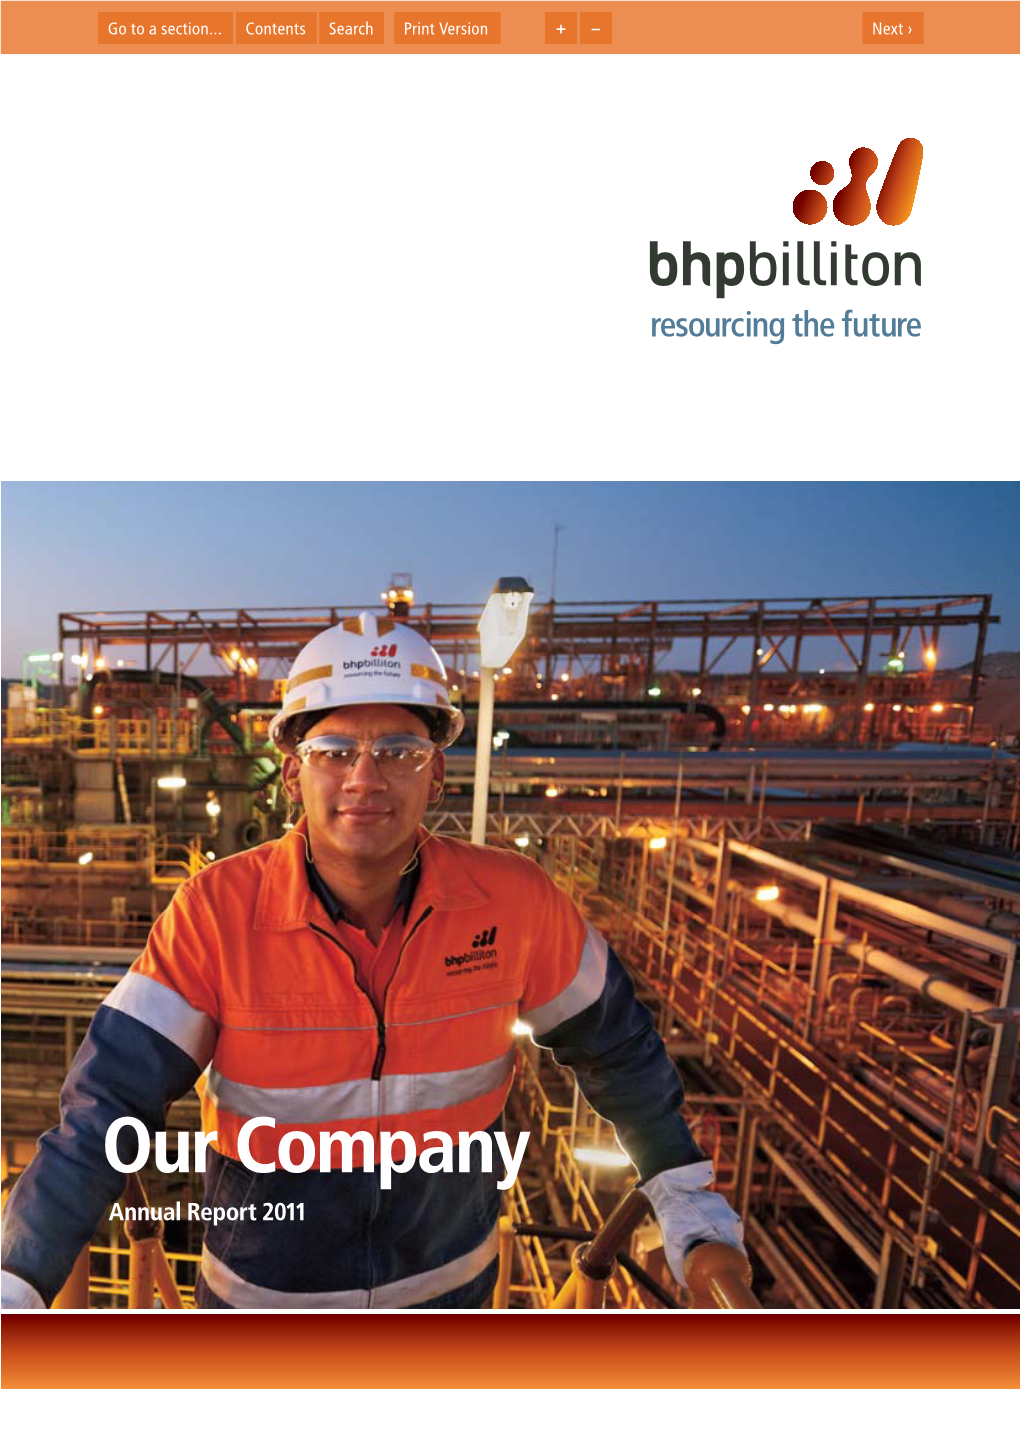 Our Company Annual Report 2011 a Disciplined Approach a Proven Strategy We Are BHP Billiton, a Leading Global Resources Company